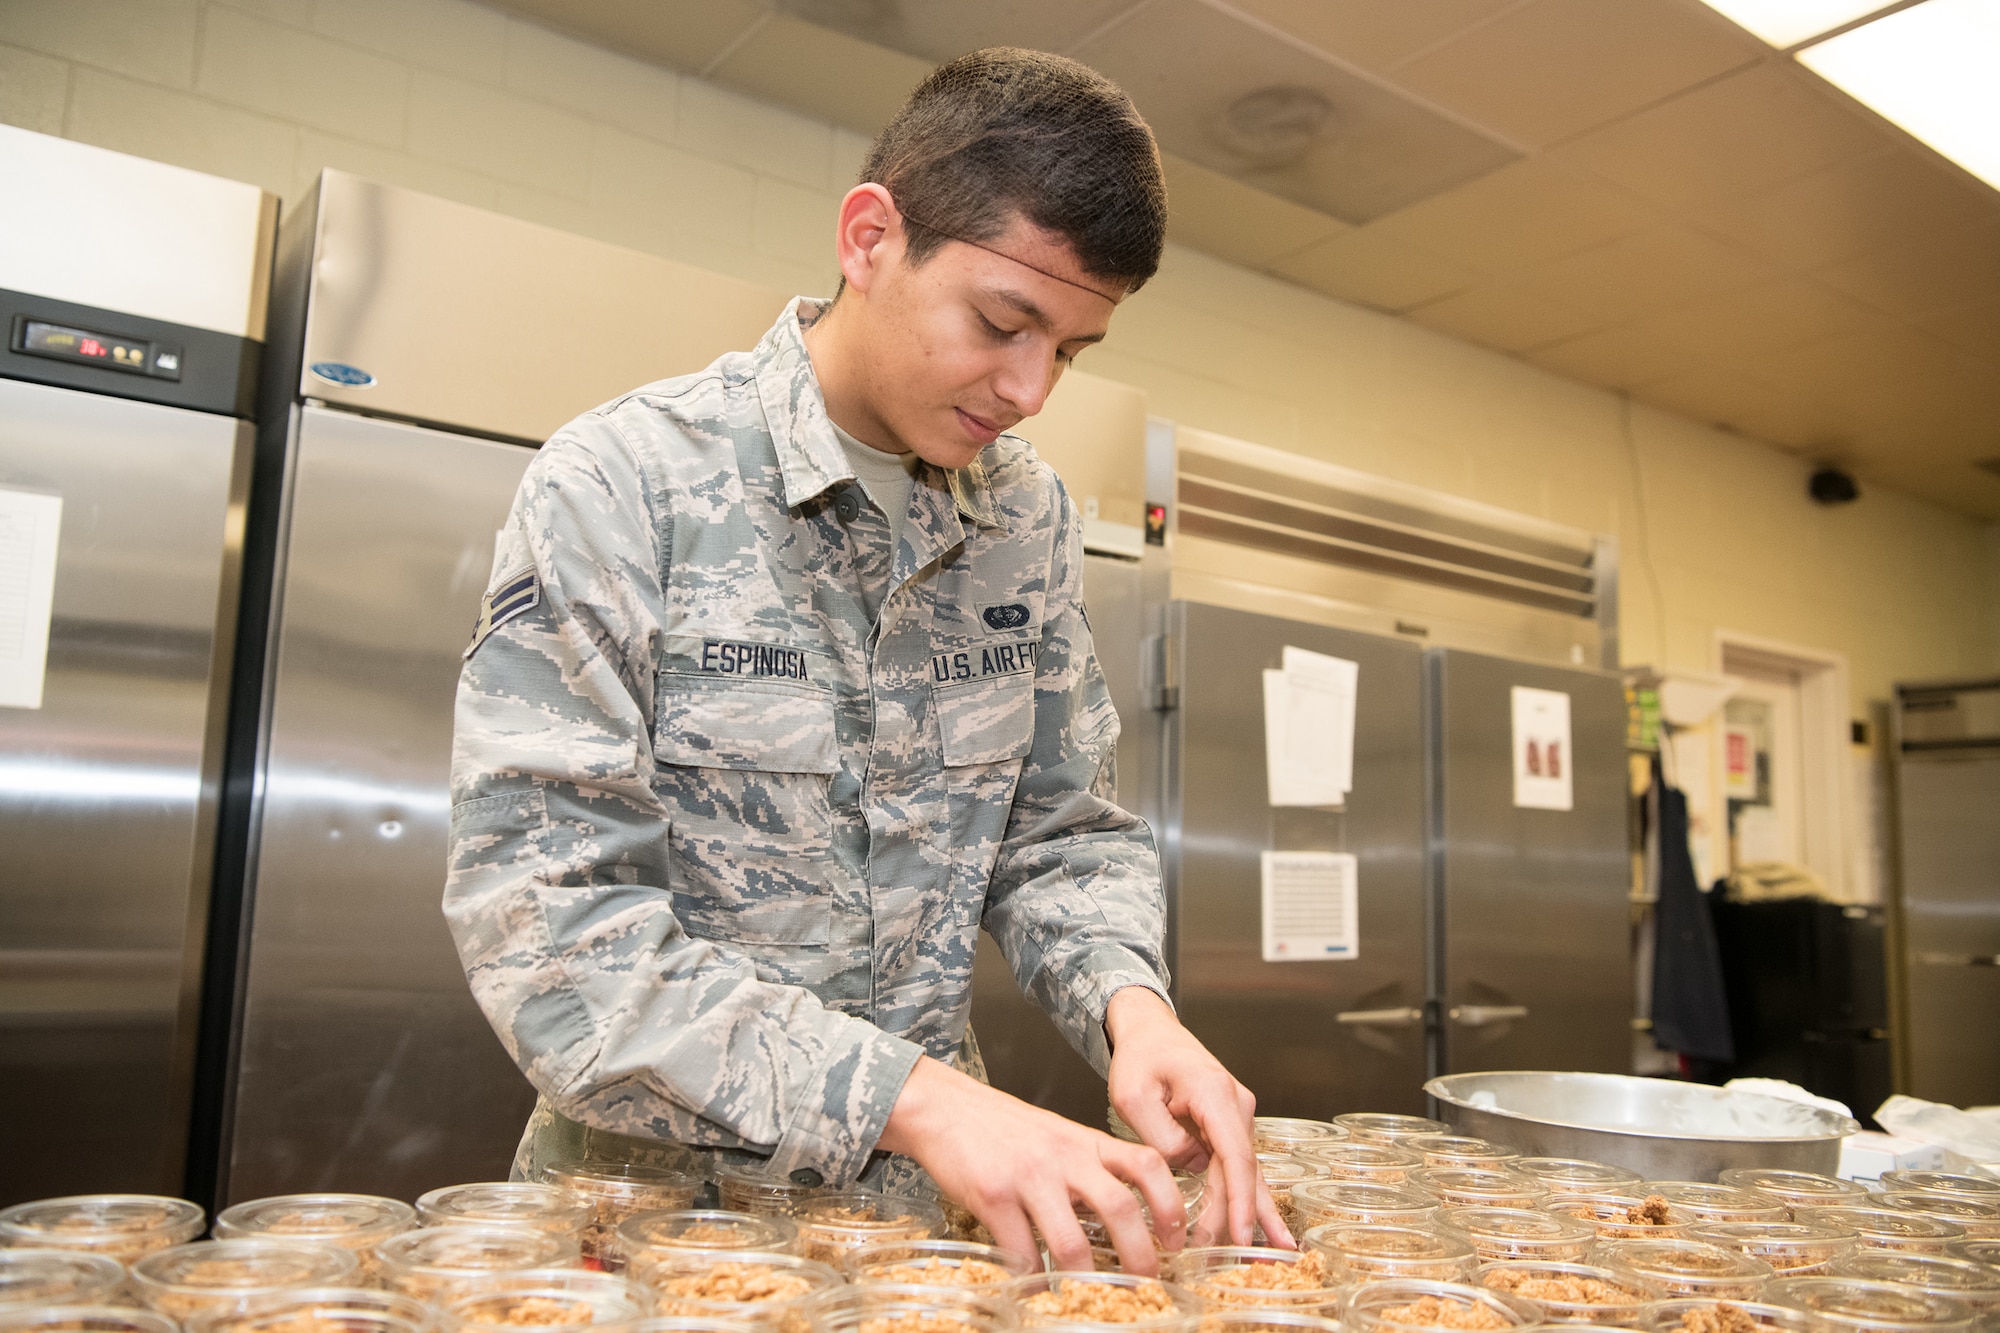 Airman 1st Class Sebastian Espinosa, 436th Force Support Squadron services journeyman, packages parfaits June 11, 2019, at the Patterson Dining Facility, Dover Air Force Base, Del. The DFAC stays open between meal times, allowing patrons to get “grab-and-go” items, like snacks, salads and prepared sandwiches. (U.S. Air Force photo by Mauricio Campino)